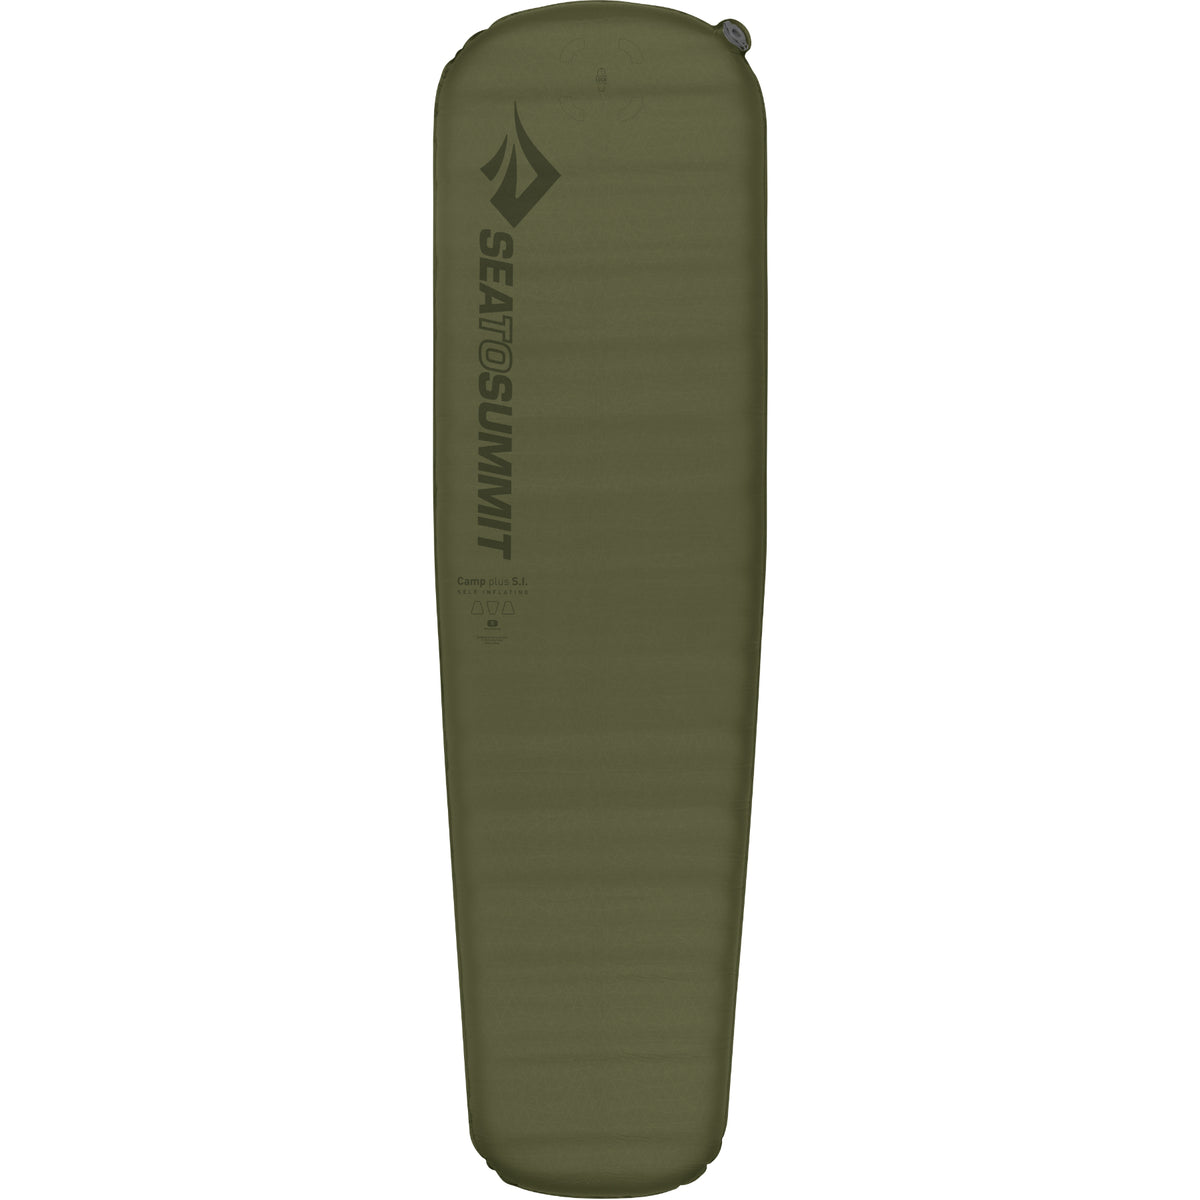 Sea to Summit Camp Plus Self Inflate SI Mat (Large)